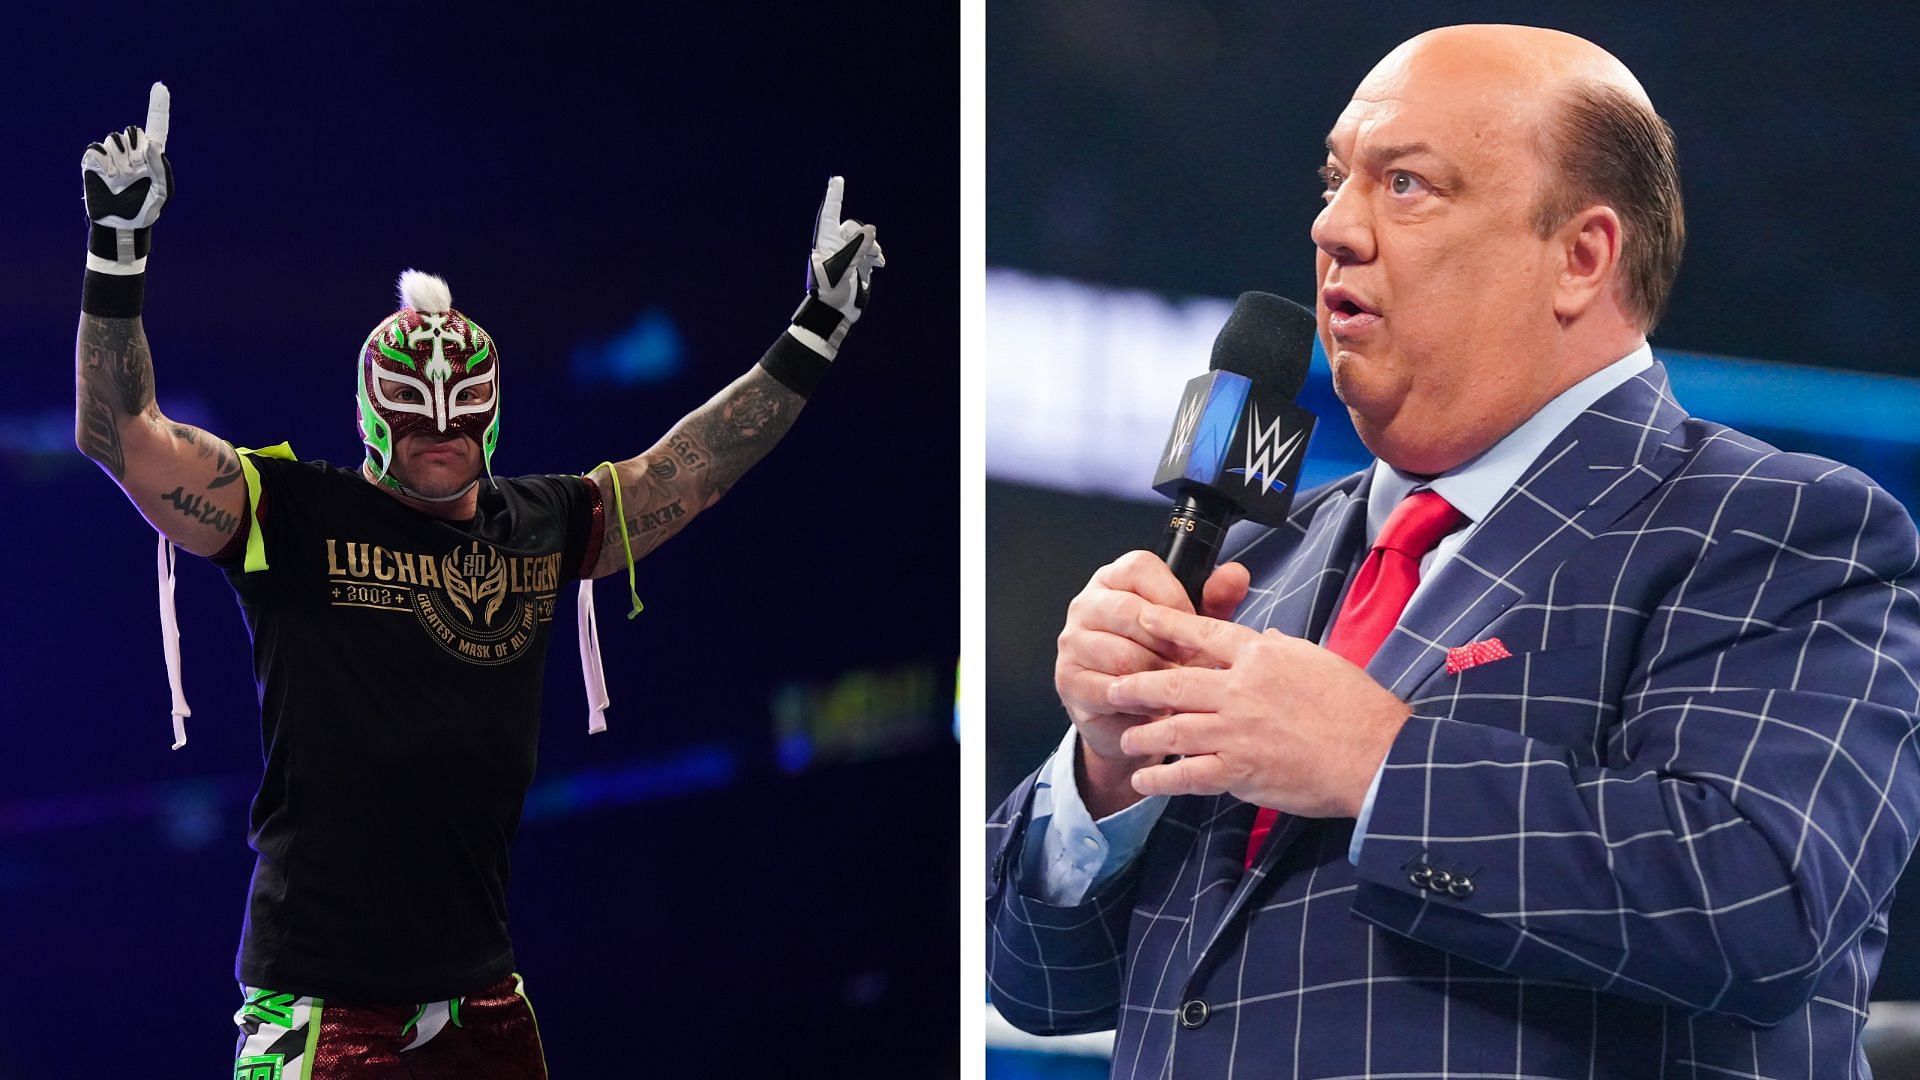 Rey Mysterio attempted to quit WWE during Friday Night SmackDown